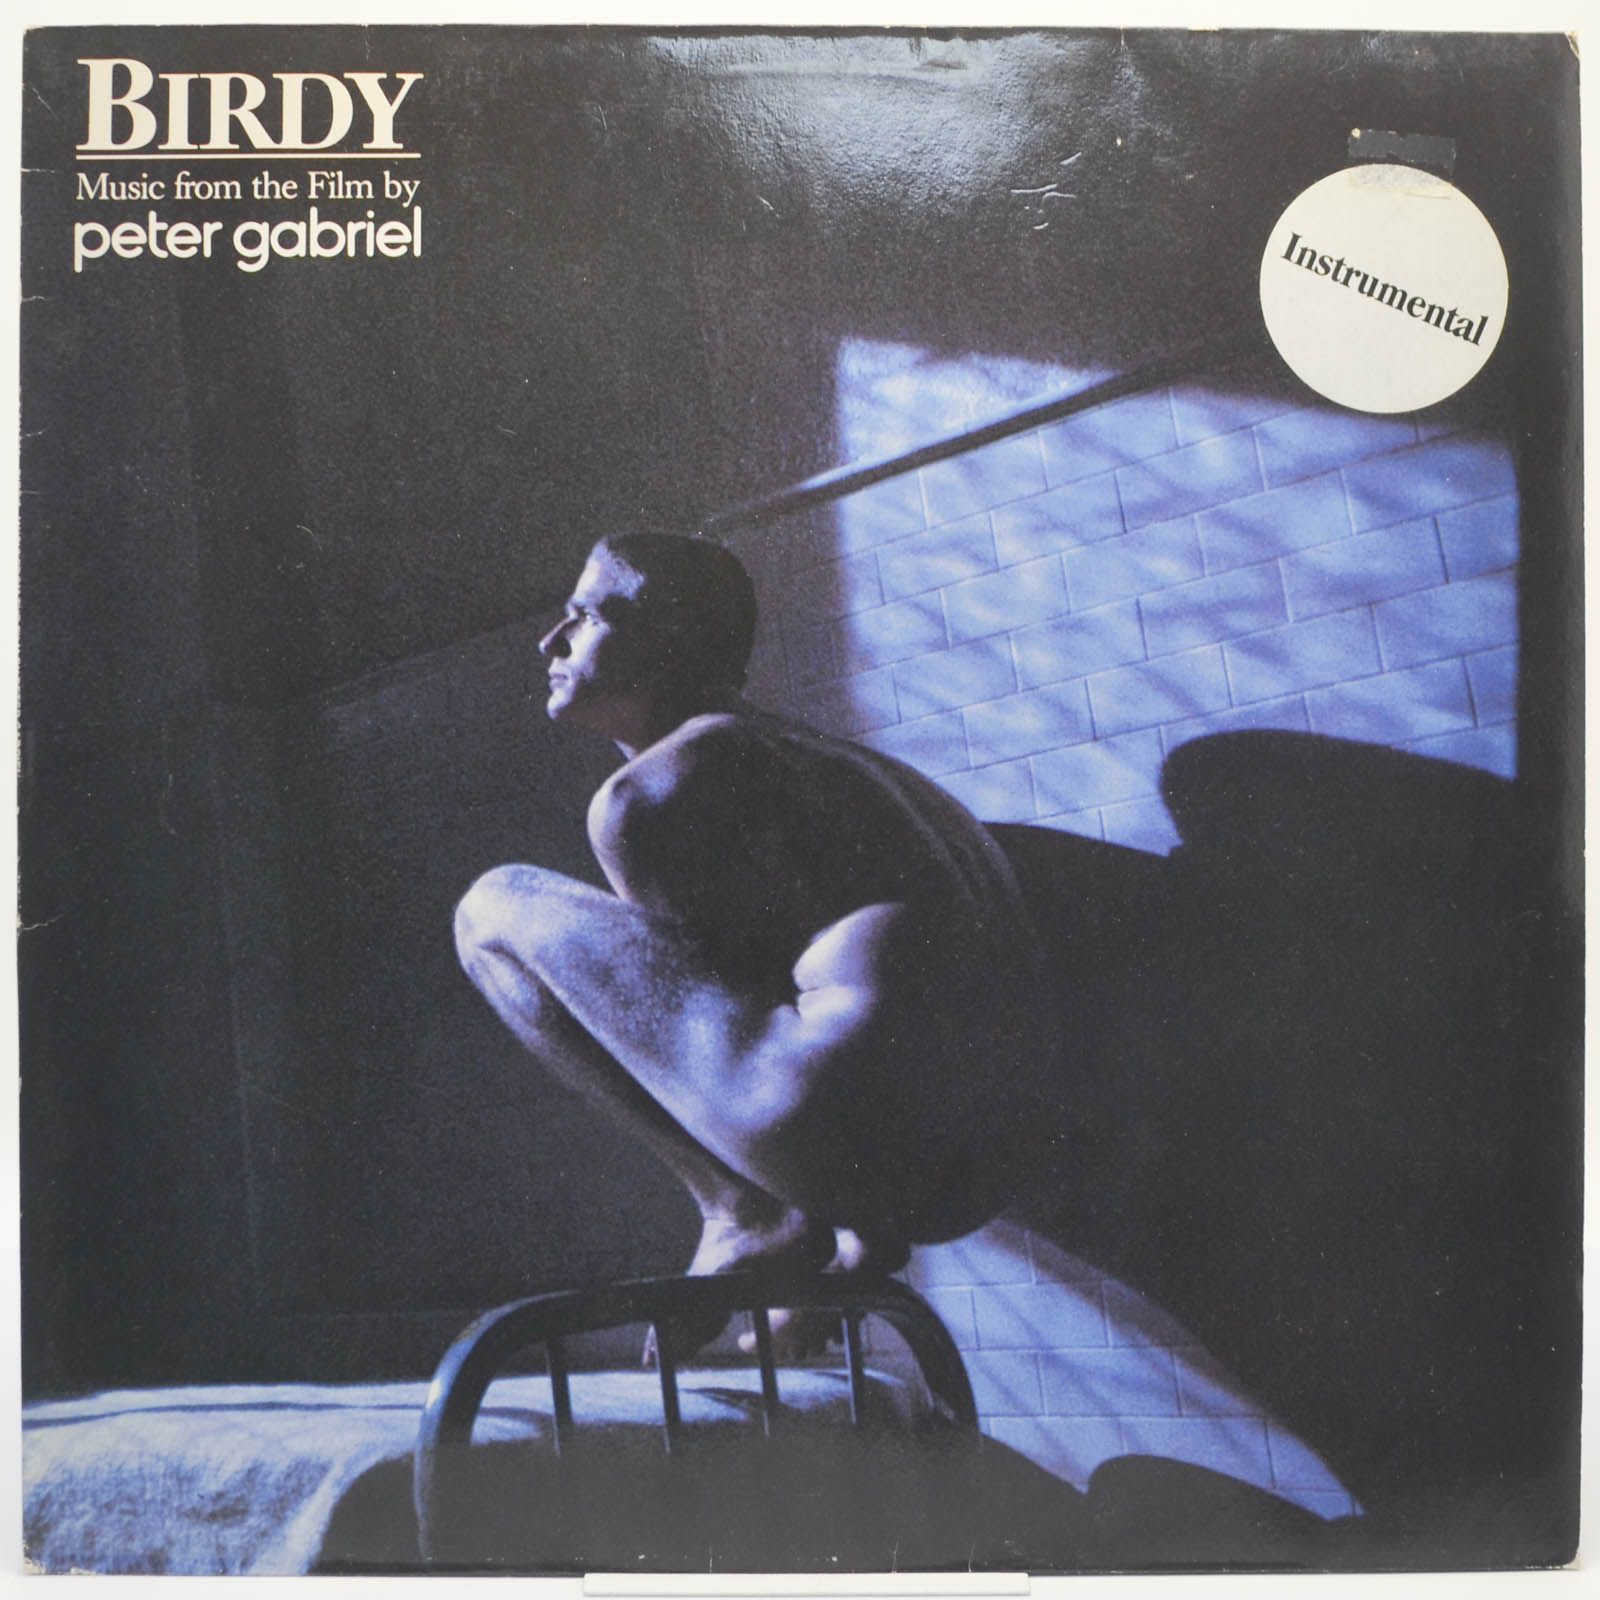 Peter Gabriel — Birdy · Music From The Film, 1985